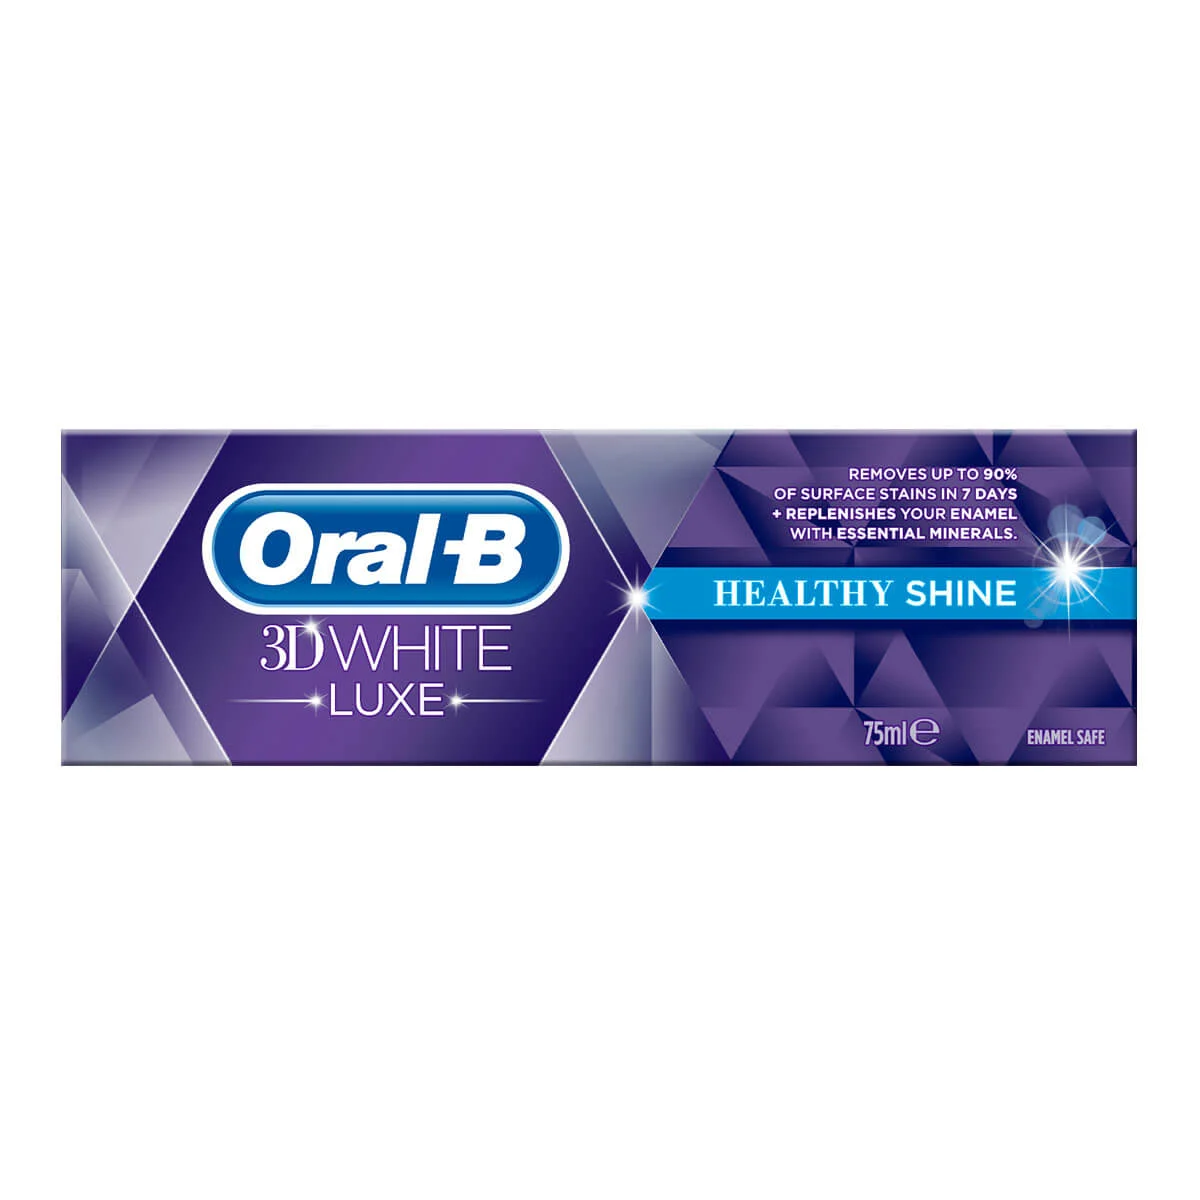 Oral-B 3D White Luxe Healthy Shine tandkräm undefined